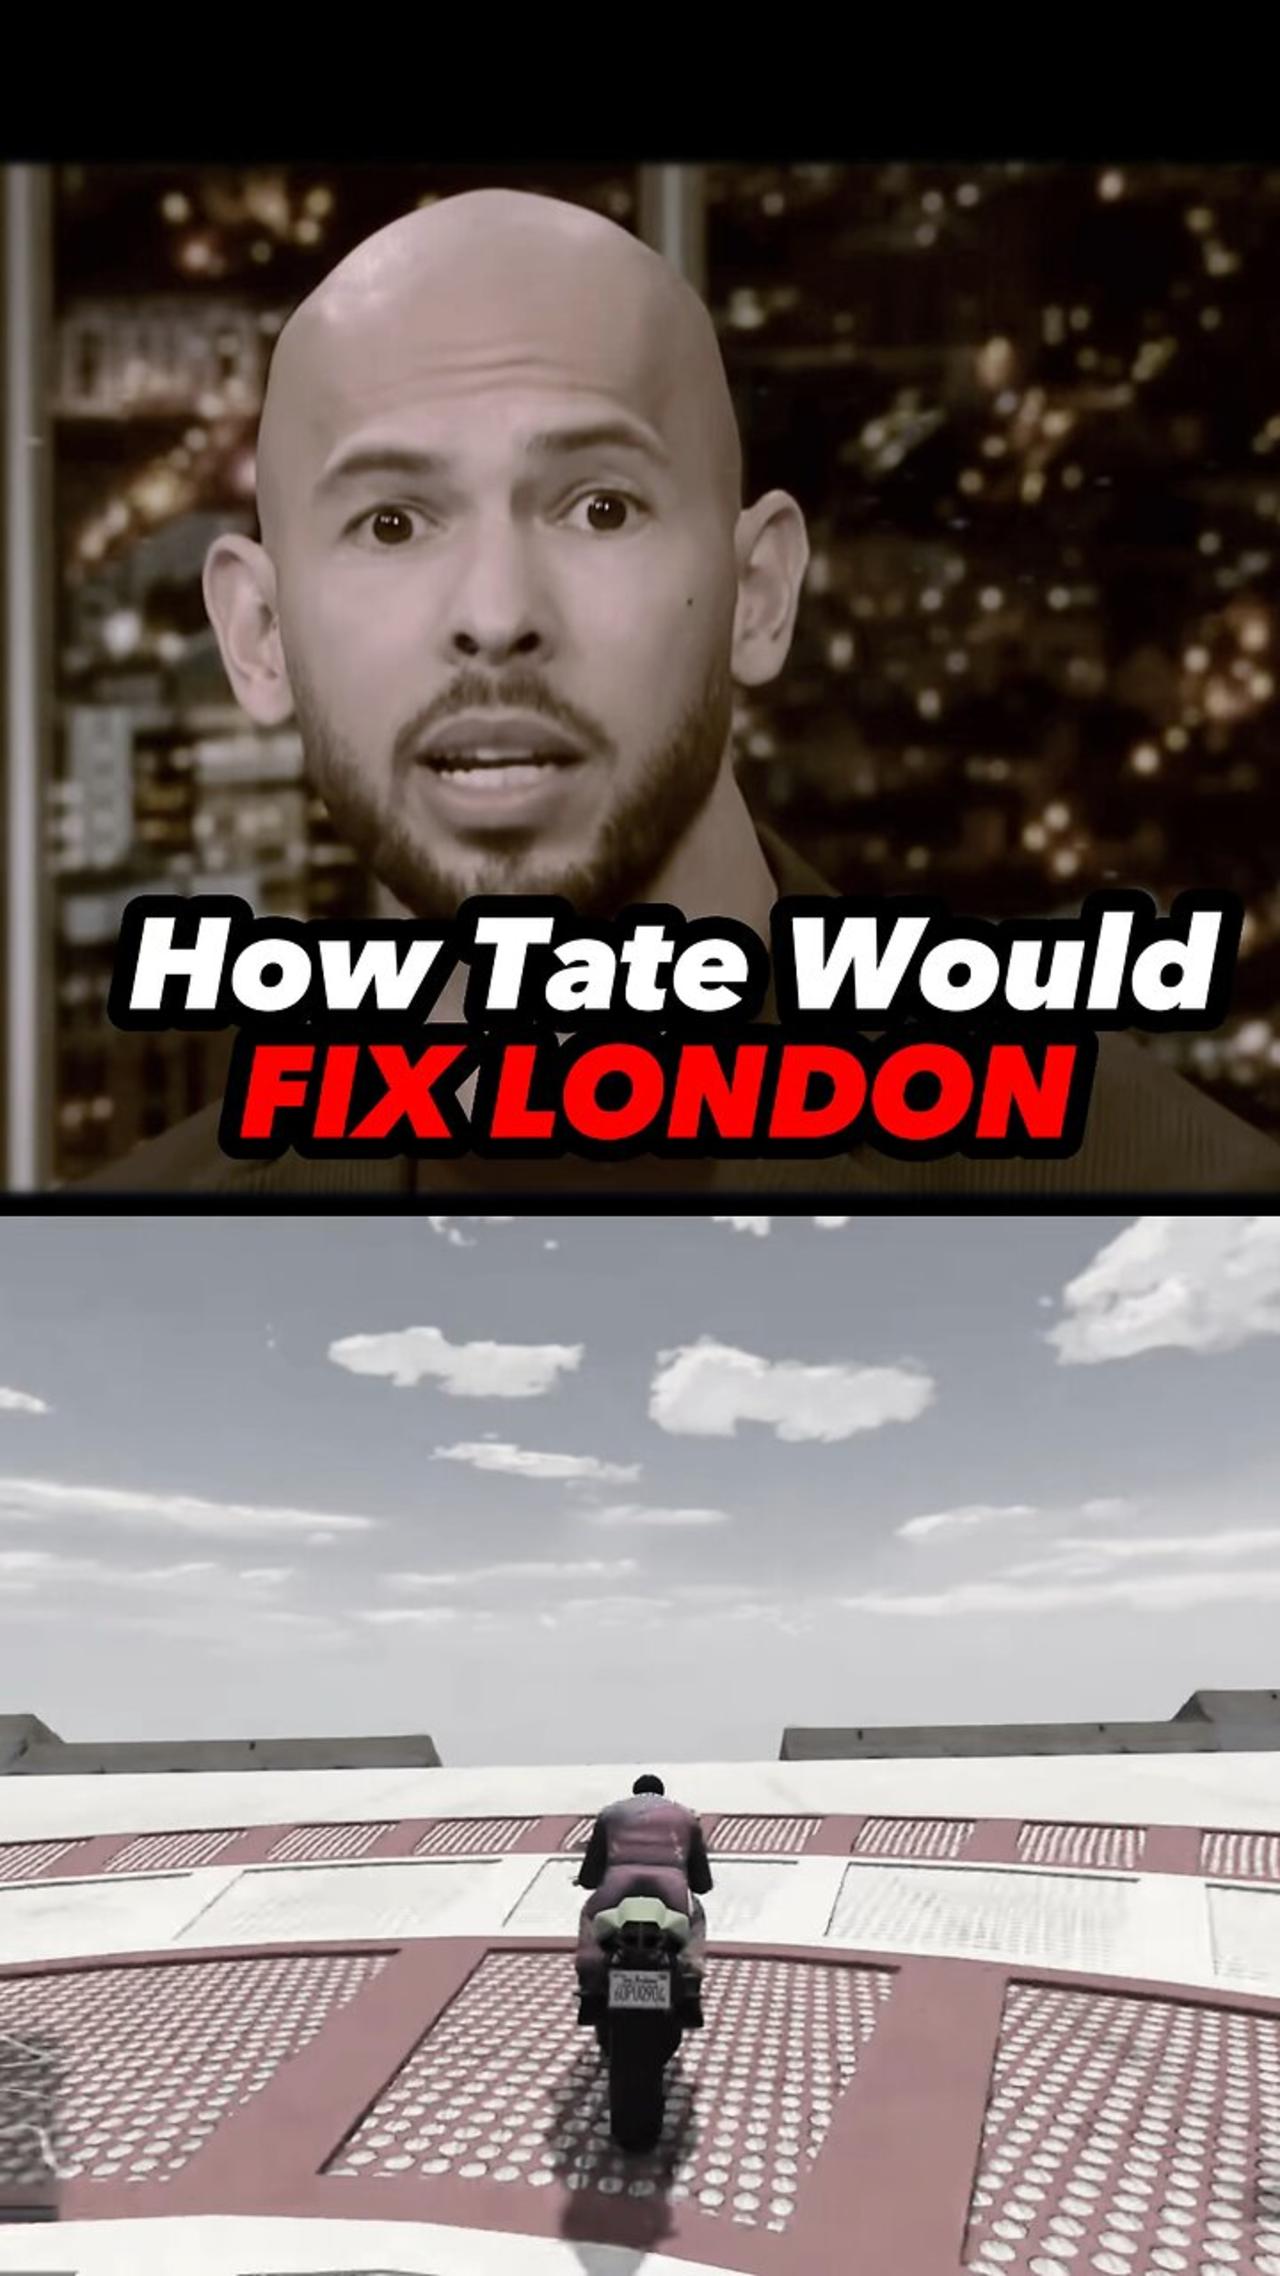 How TATE would FIX London